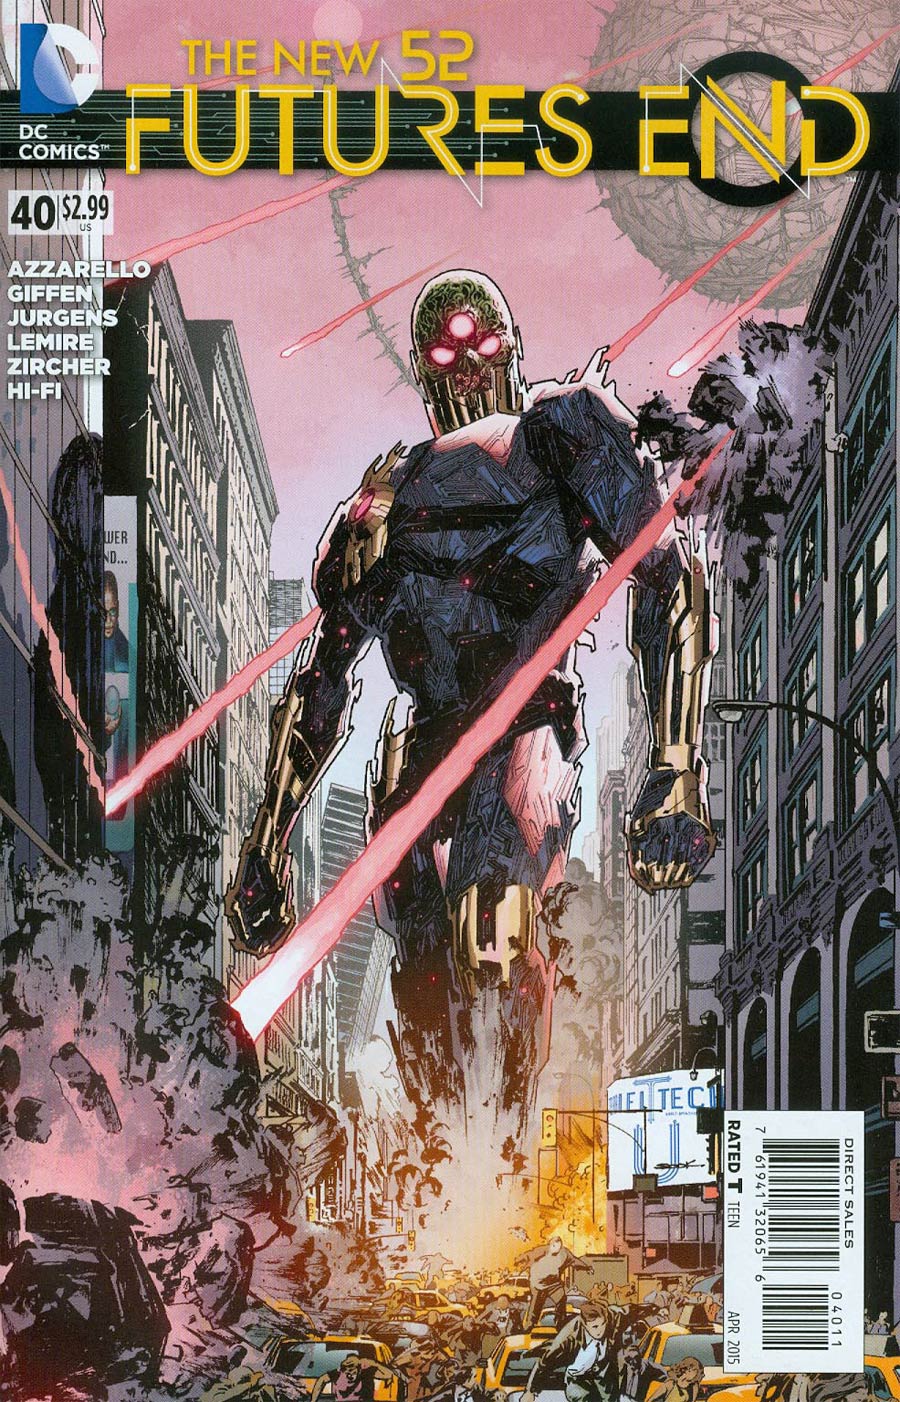 New 52 Futures End #40